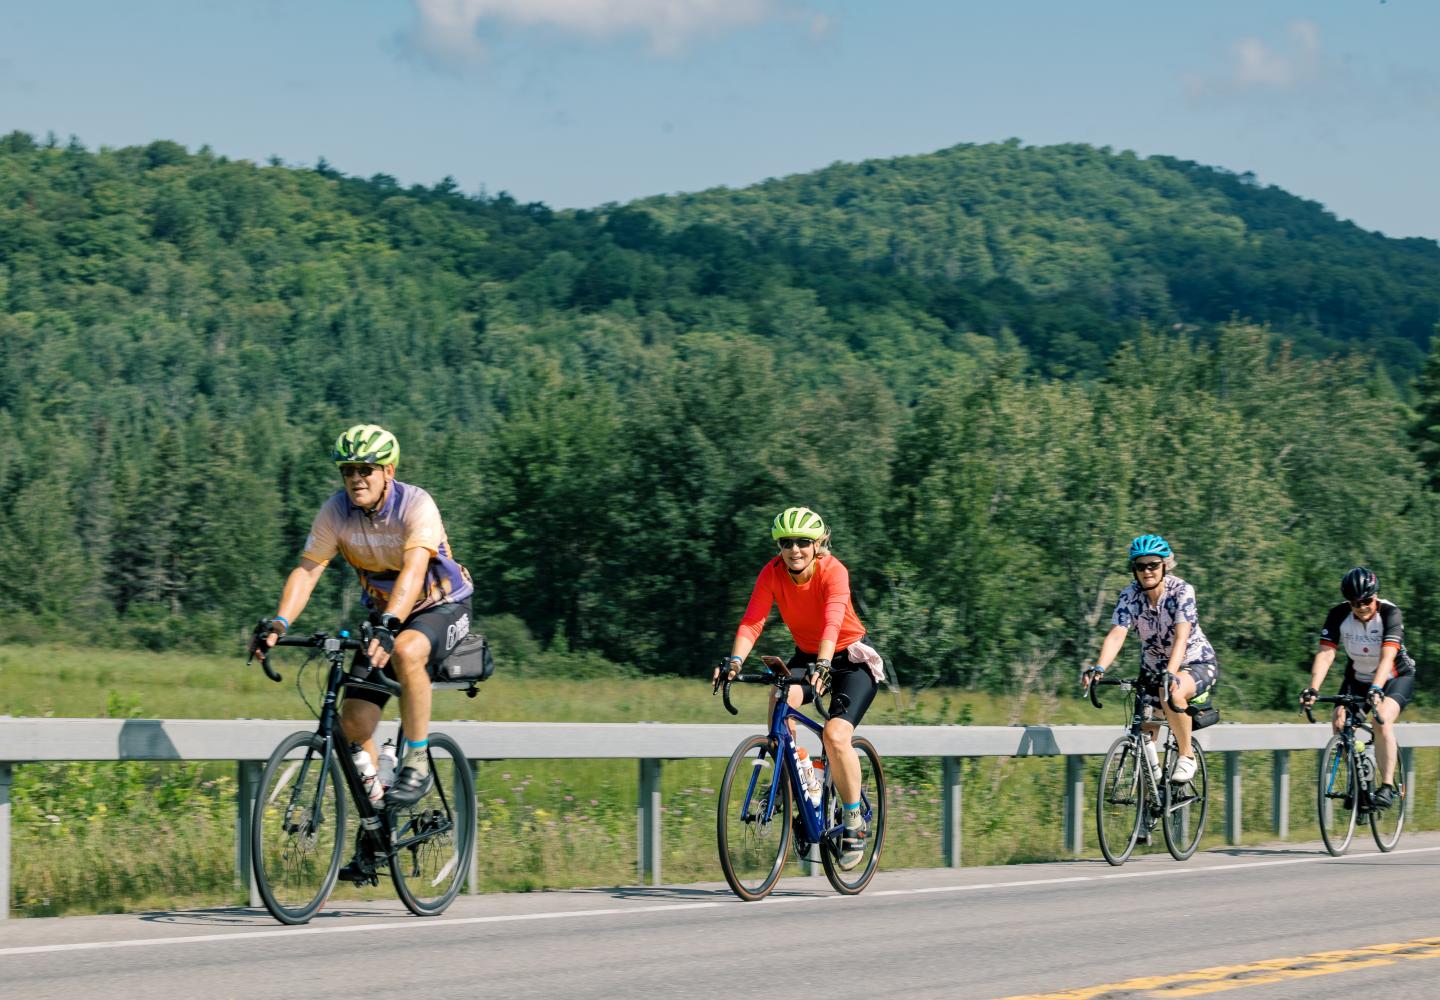 The Pat Stratton Ride is well known as the best ride in the Adirondacks. 